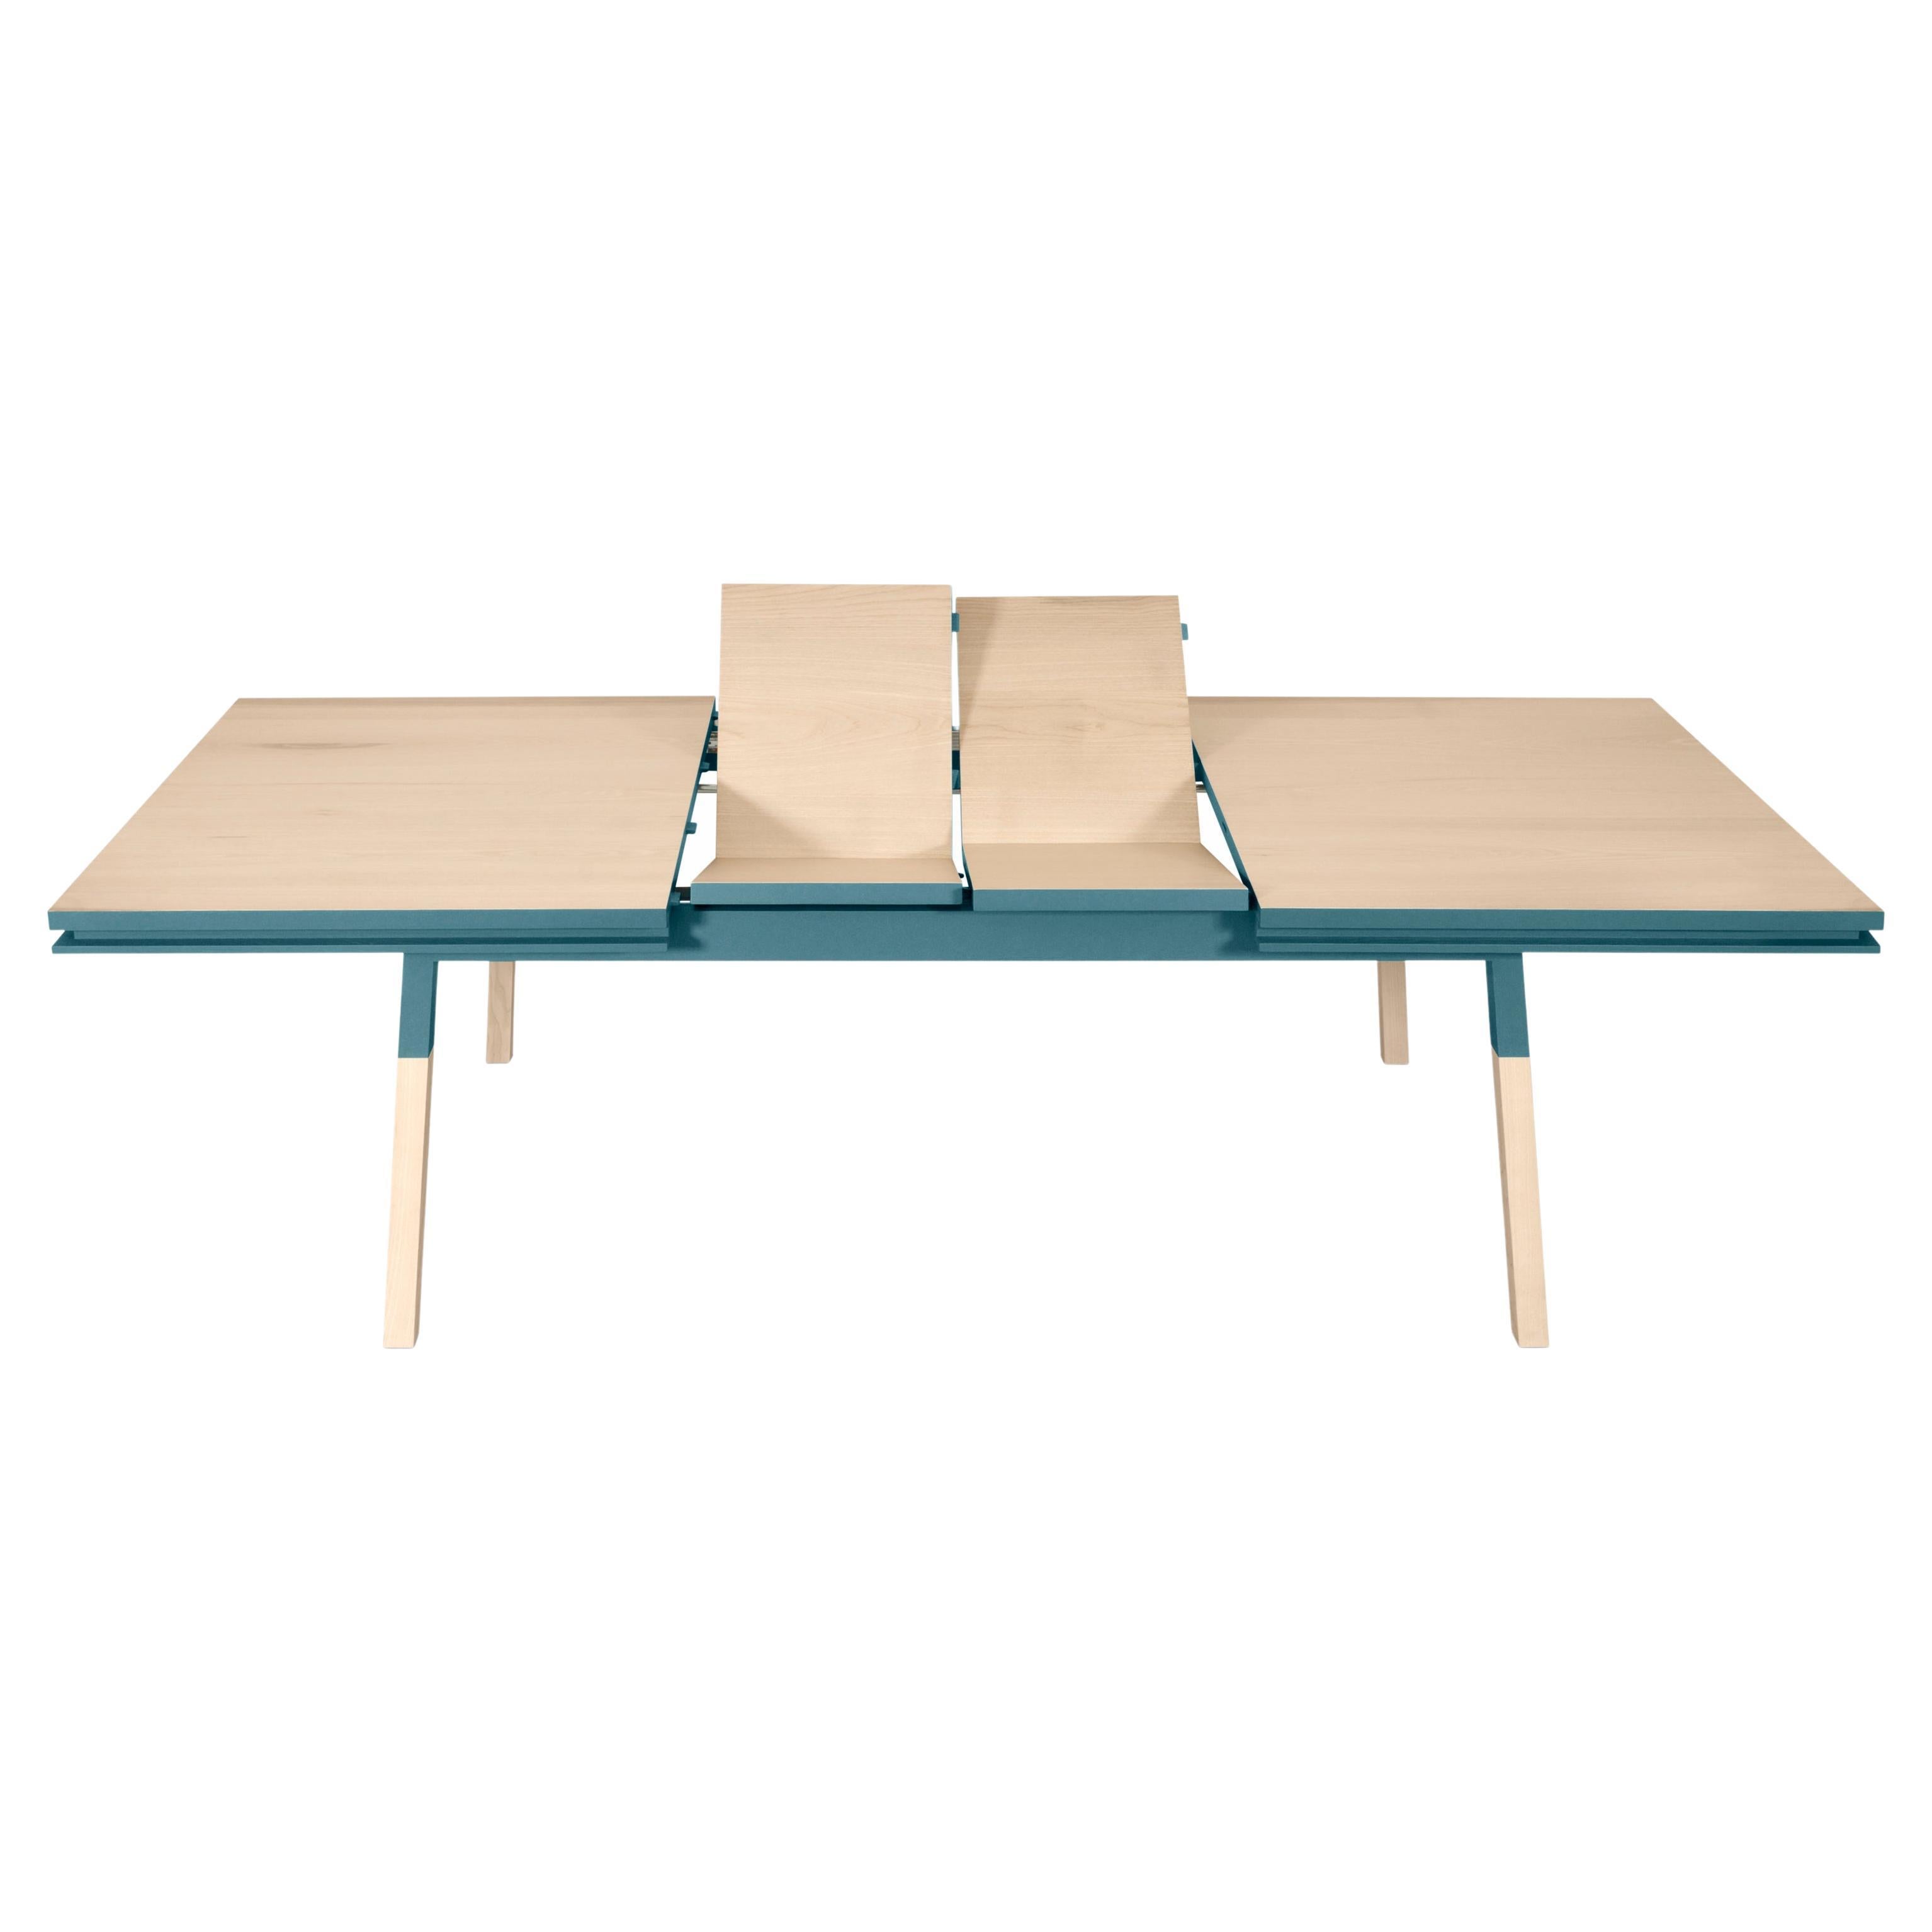 Light Blue Extensible Table in Solid Ash Wood, Designed by Eric Gizard, Paris